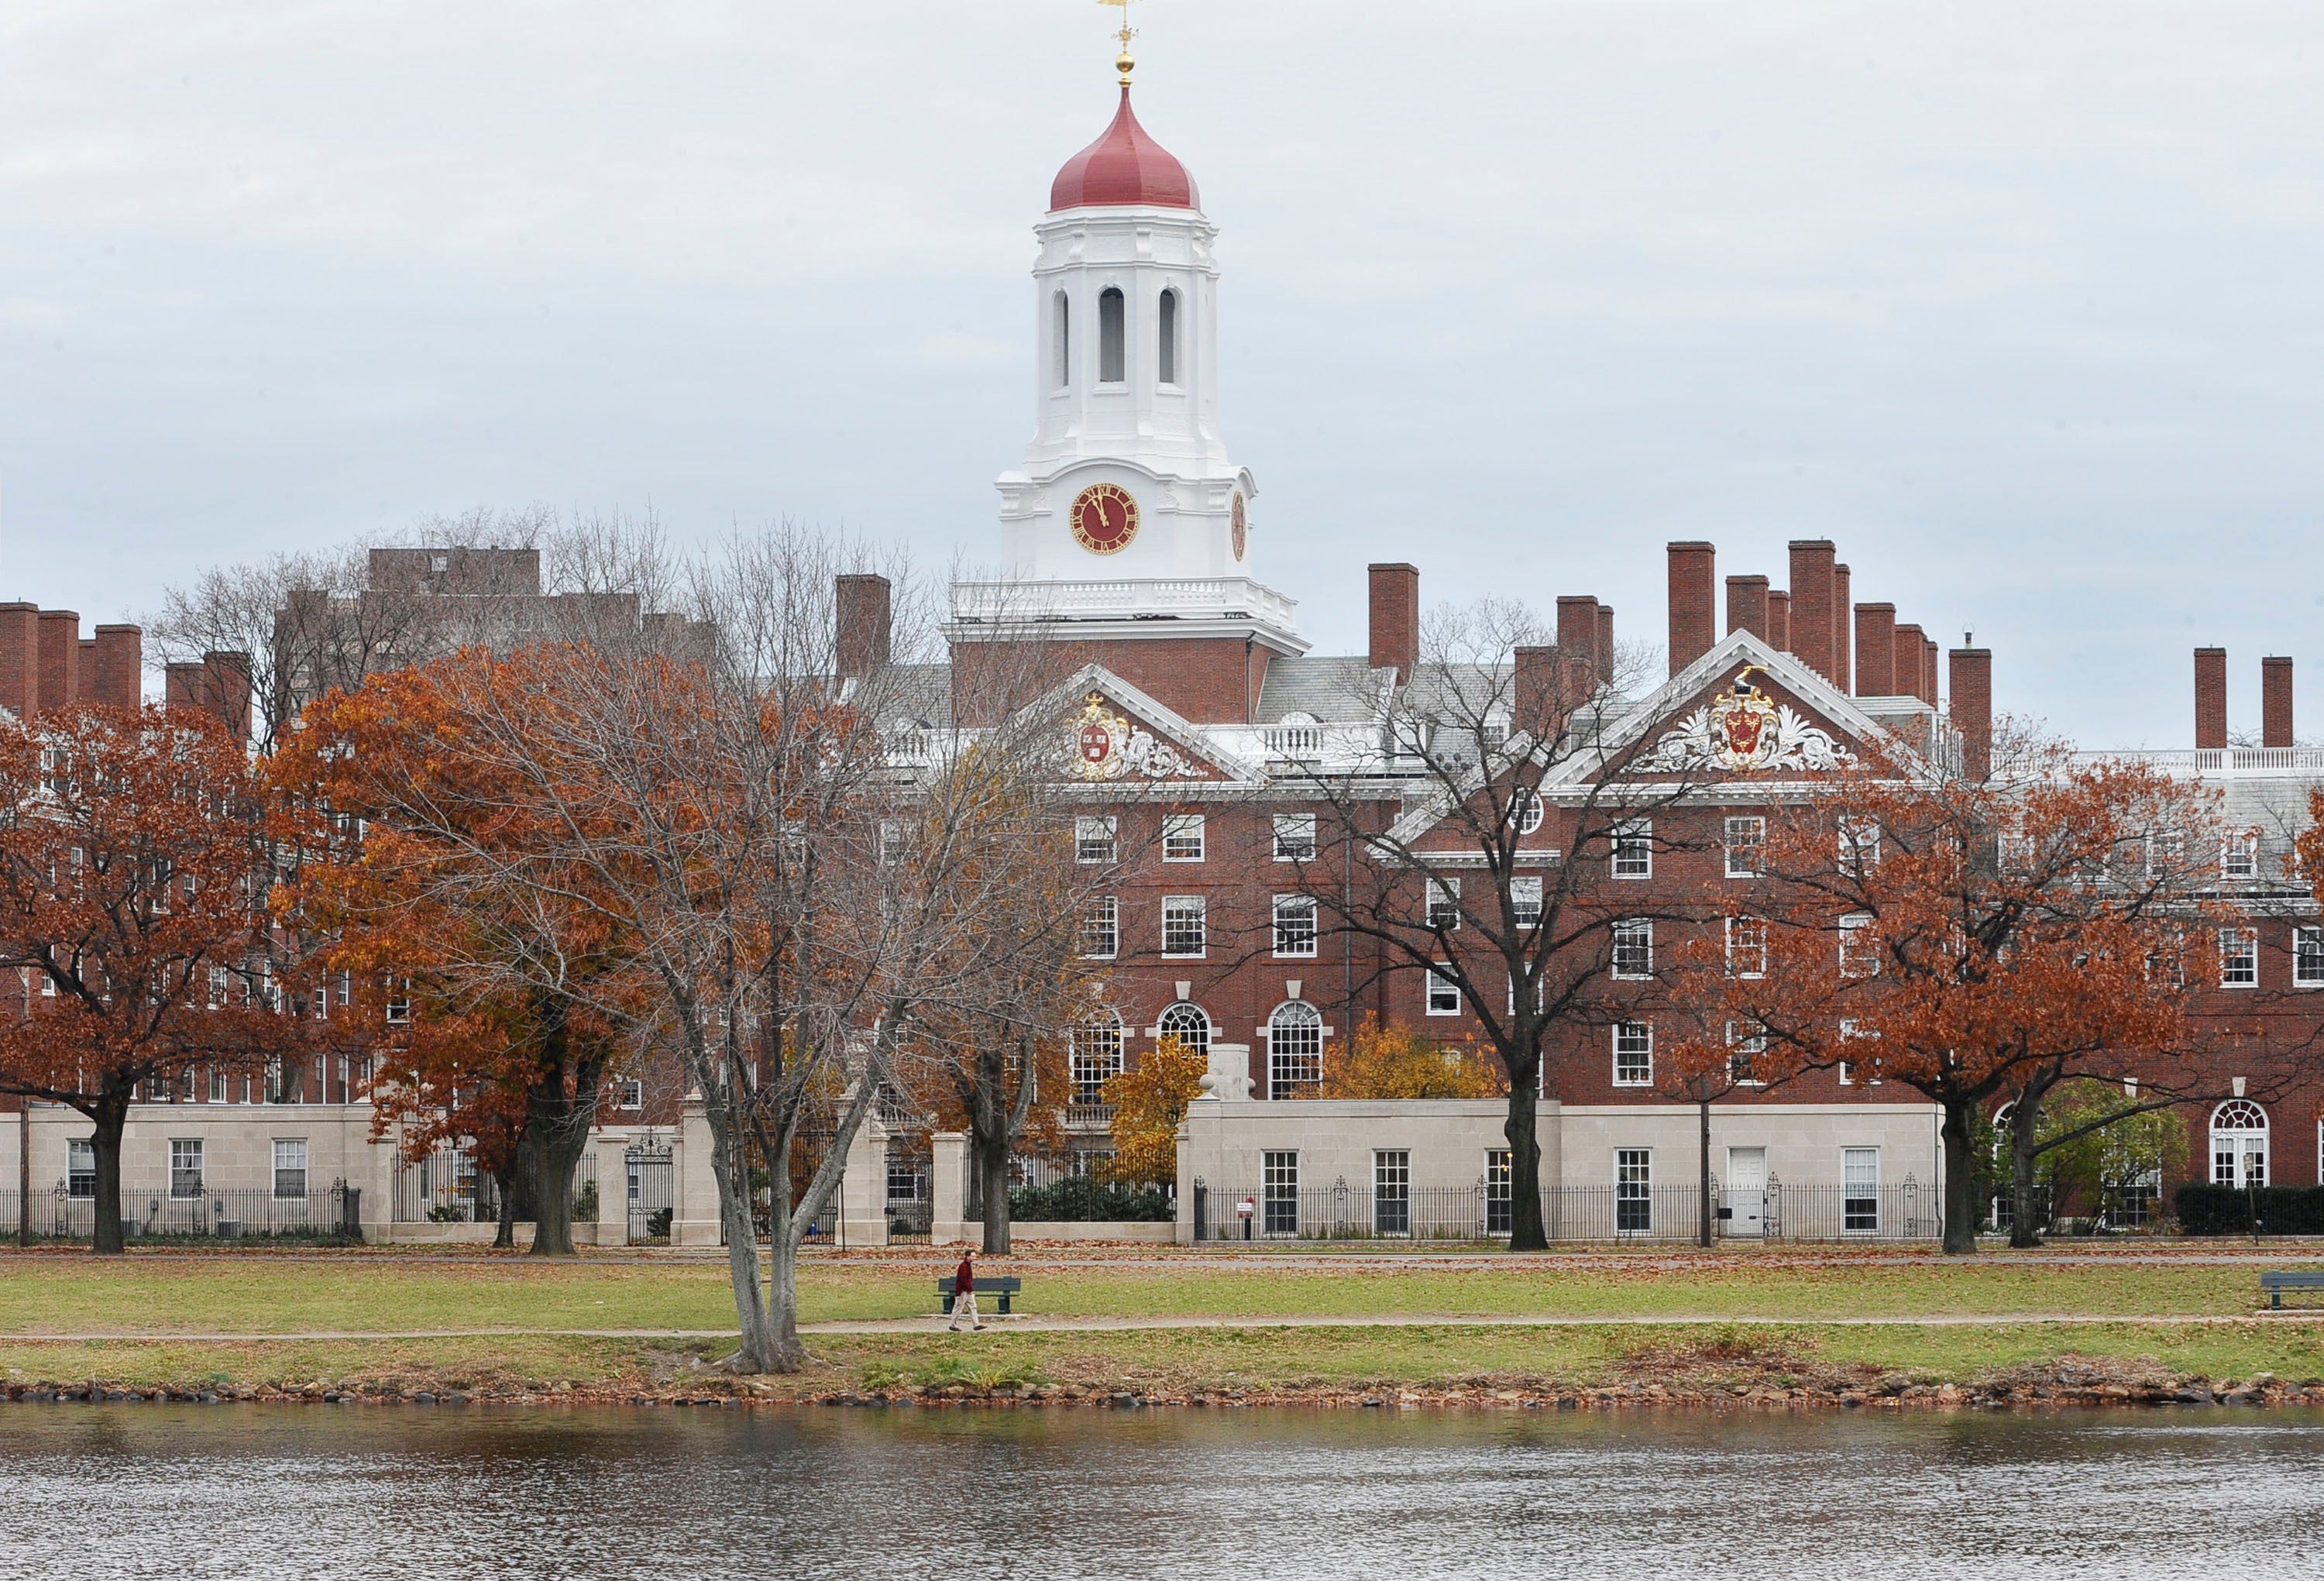 In its statement, Harvard said the library noted several ways in which its stewardship practices failed to meet its ethical standards